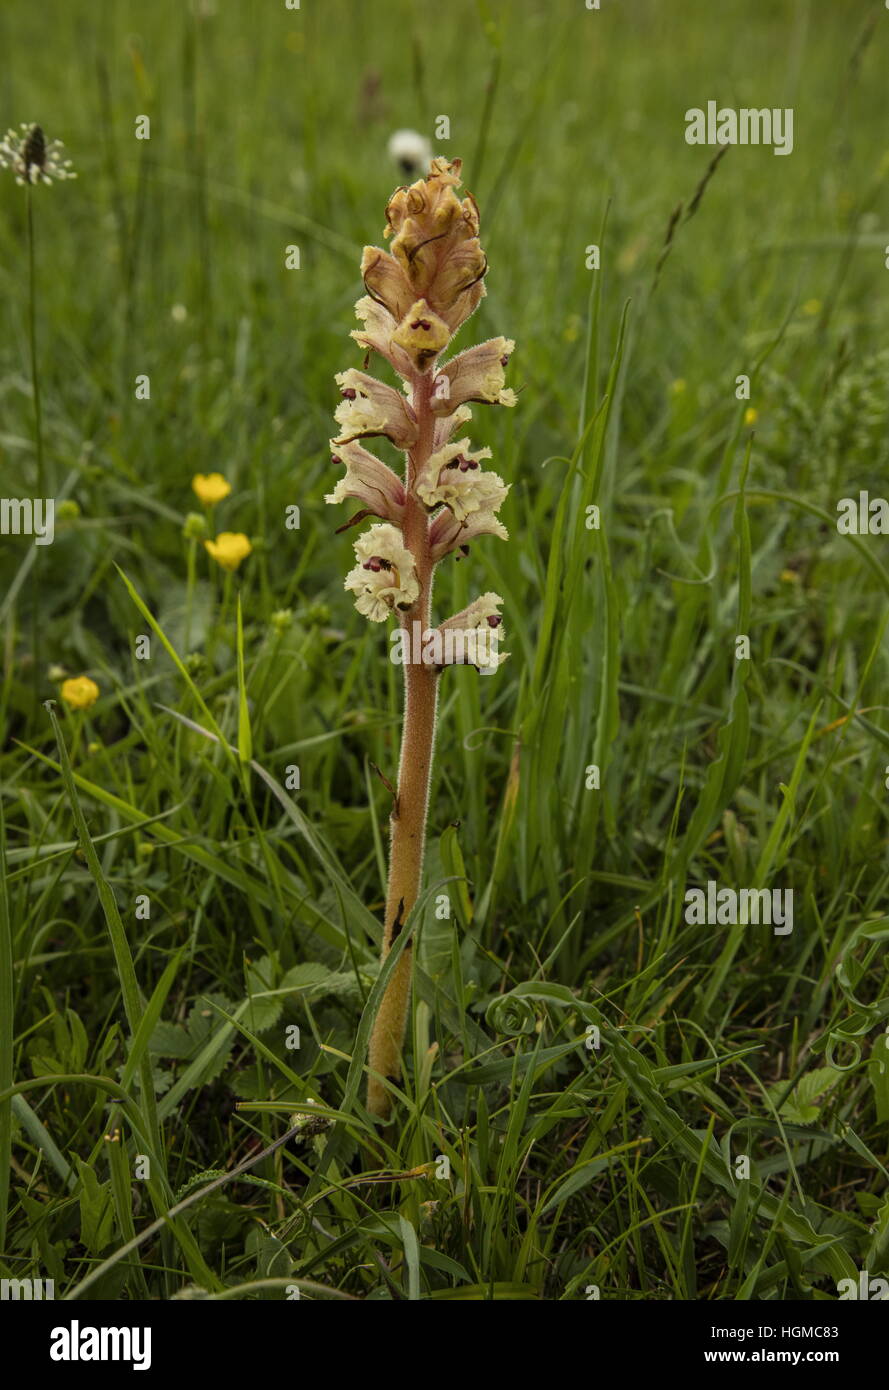 Bedstraw Broomrape, or Clove-scented broomrape, Orobanche caryophyllacea, parasitic on bedstraws on downland. Stock Photo